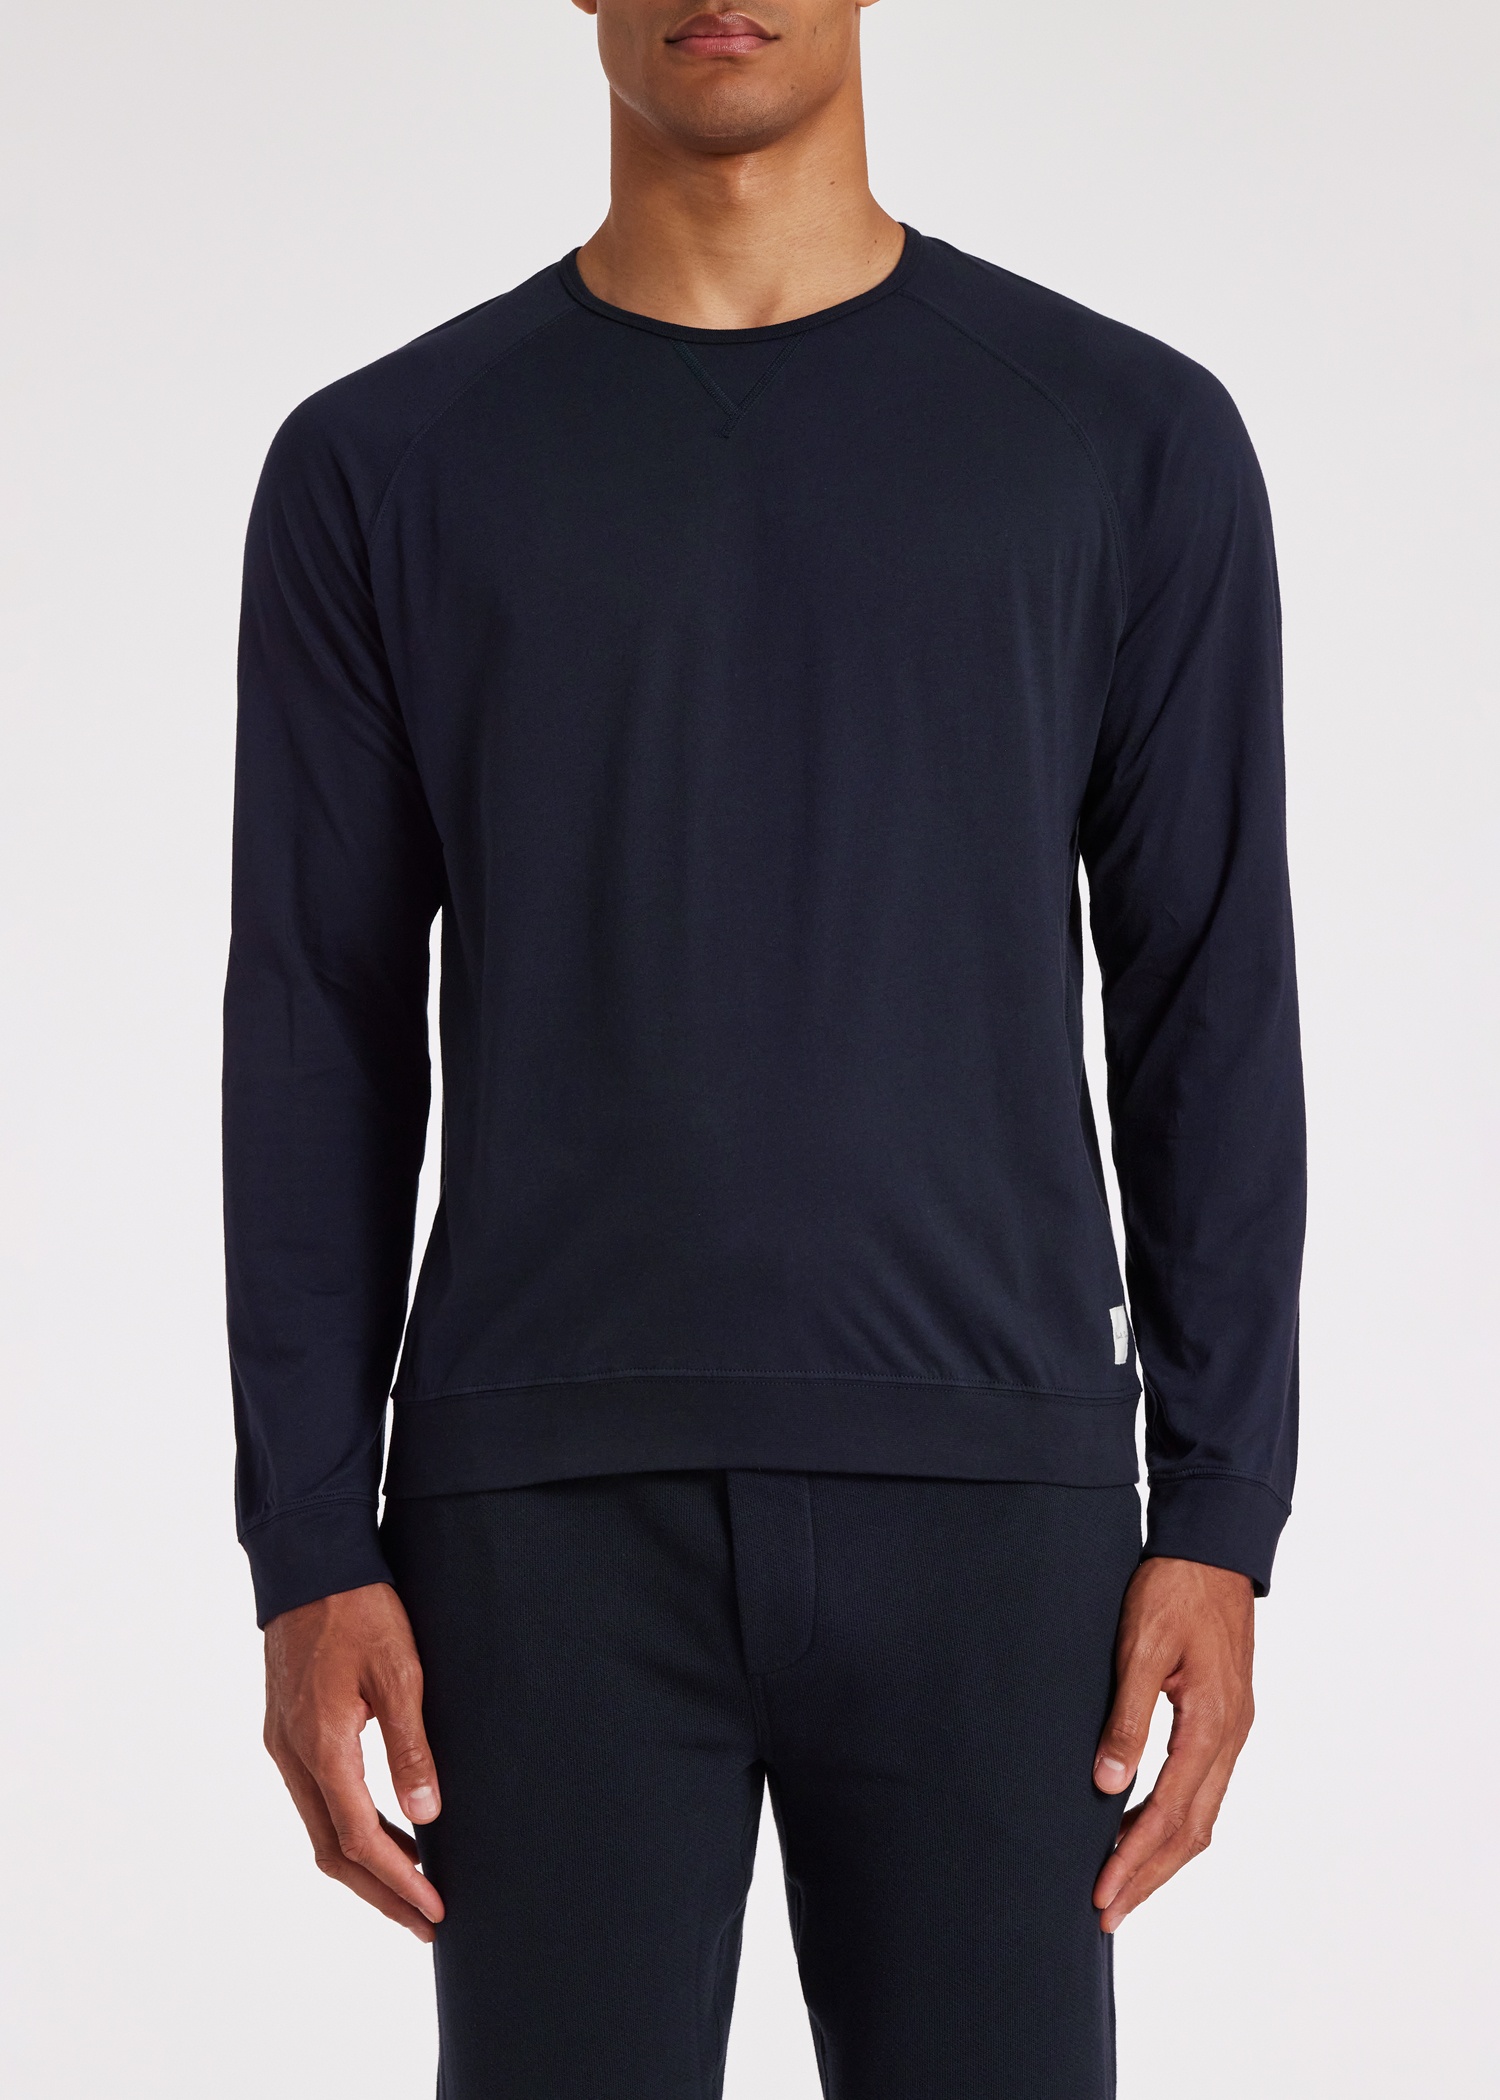 Navy Jersey Cotton Long-Sleeve Lounge Top - 4